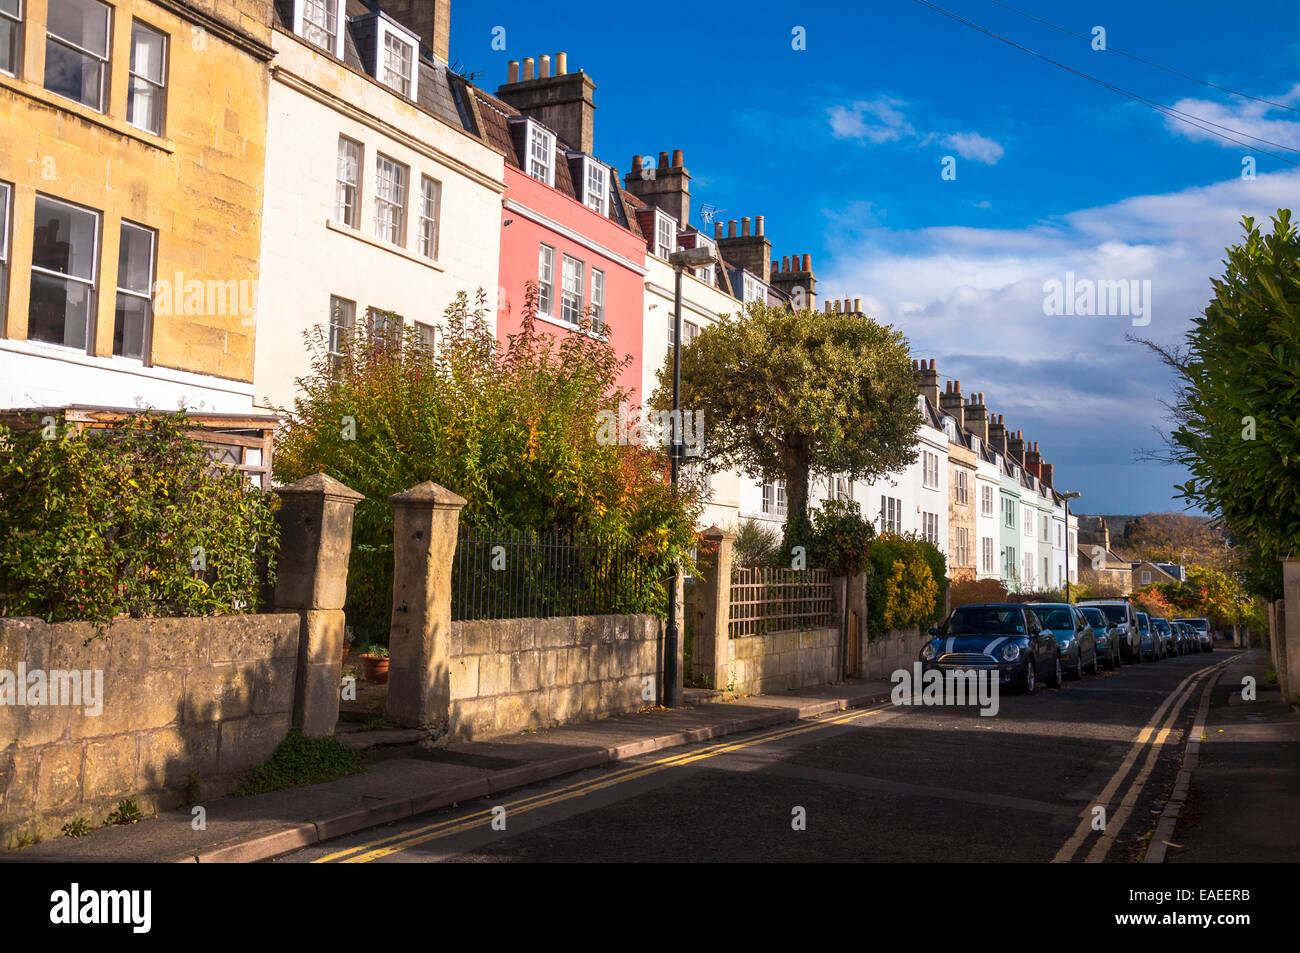 Lambridge Place houses and cars parked in Larkhall Bath Somerset Stock Photo